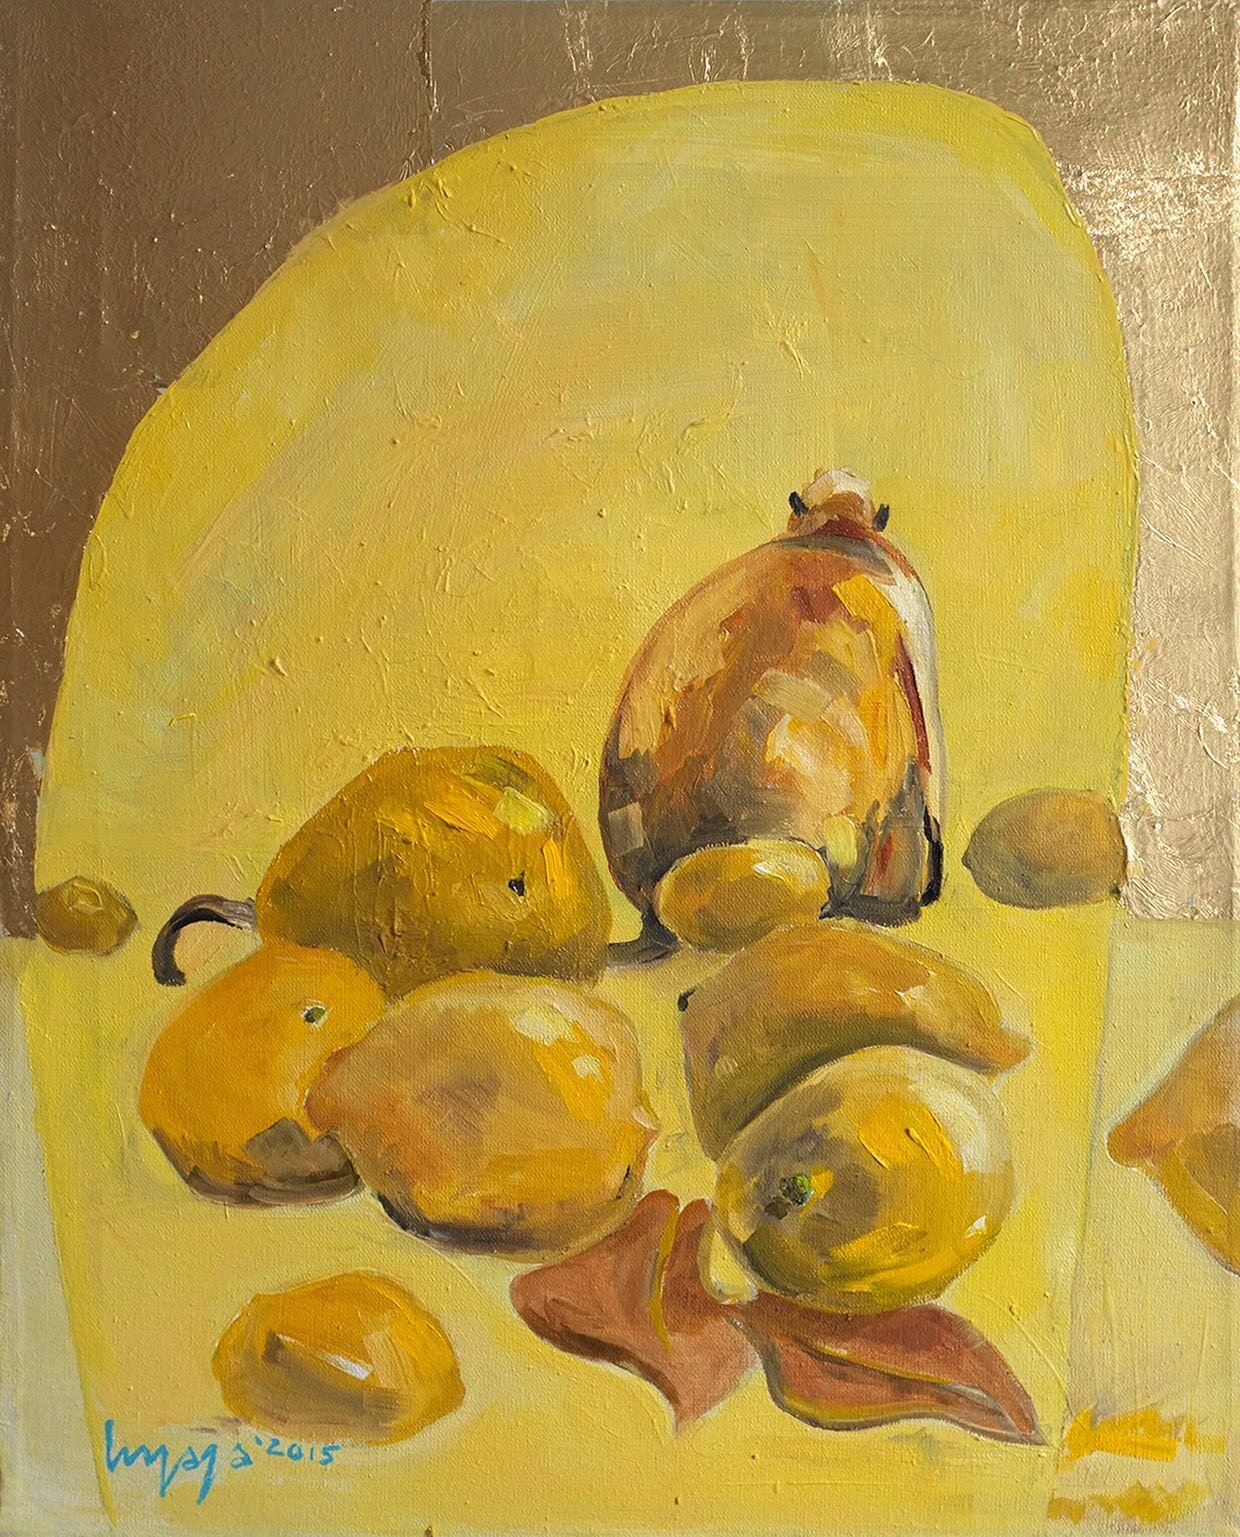 Just found some gold in my archives. Heat / 40x50 / Oil and gold leaf on canvas / 2015 #painting #ingagaart #ingakaupelyte #heatpainting #monkeyandlemons #yellowpainting